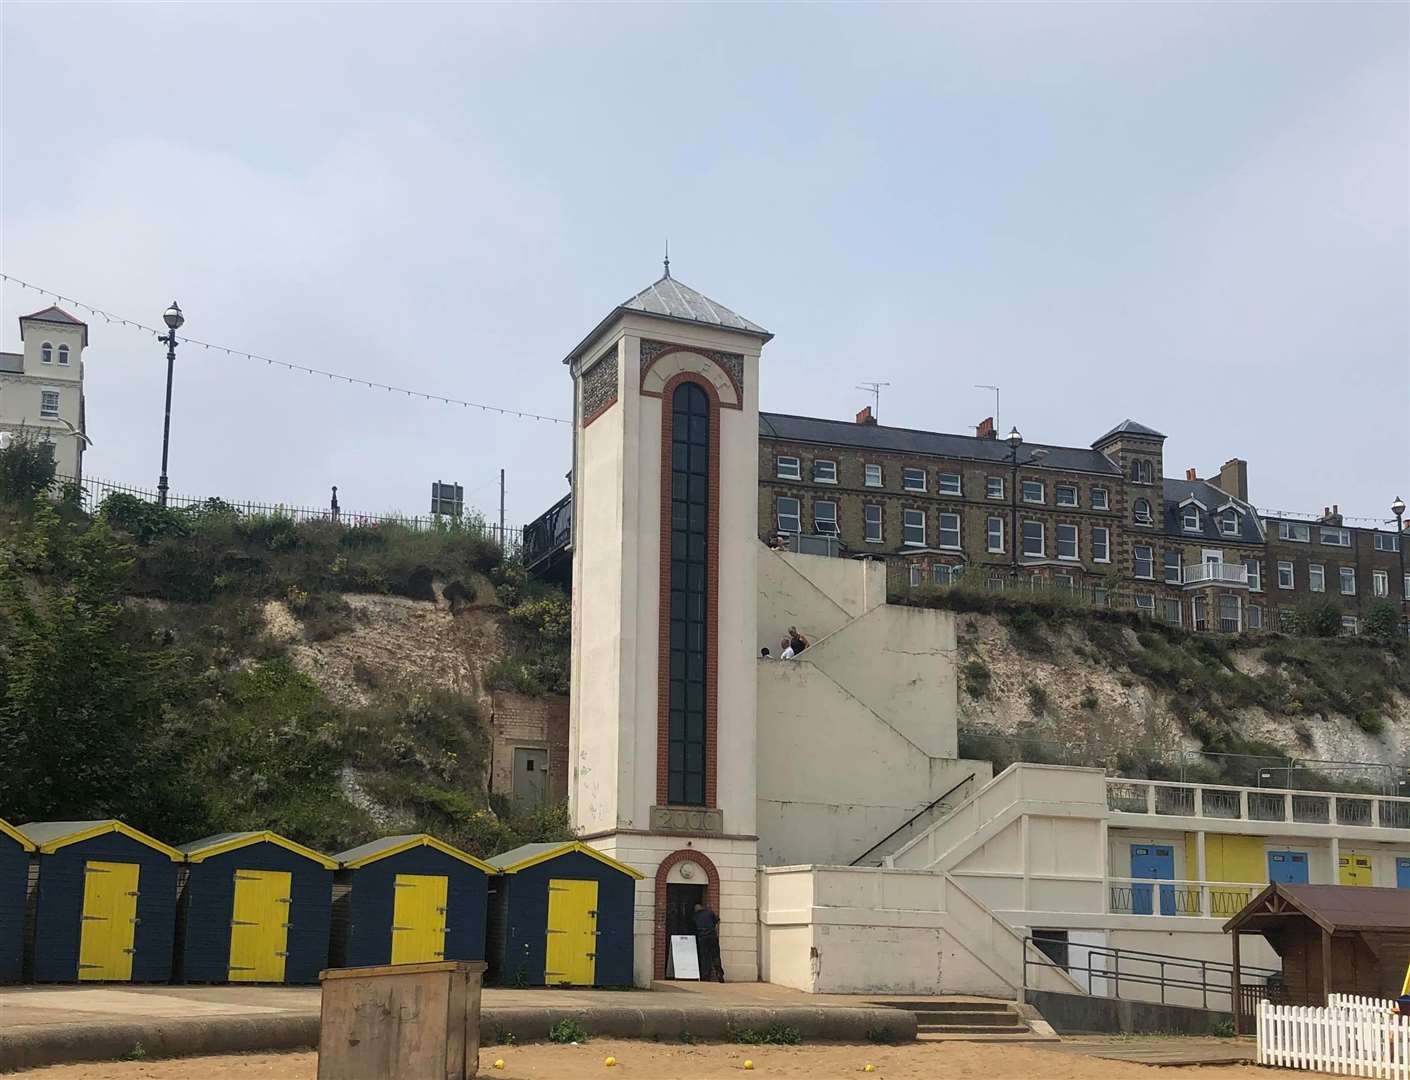 The Viking Bay lift in Broadstairs (12963666)